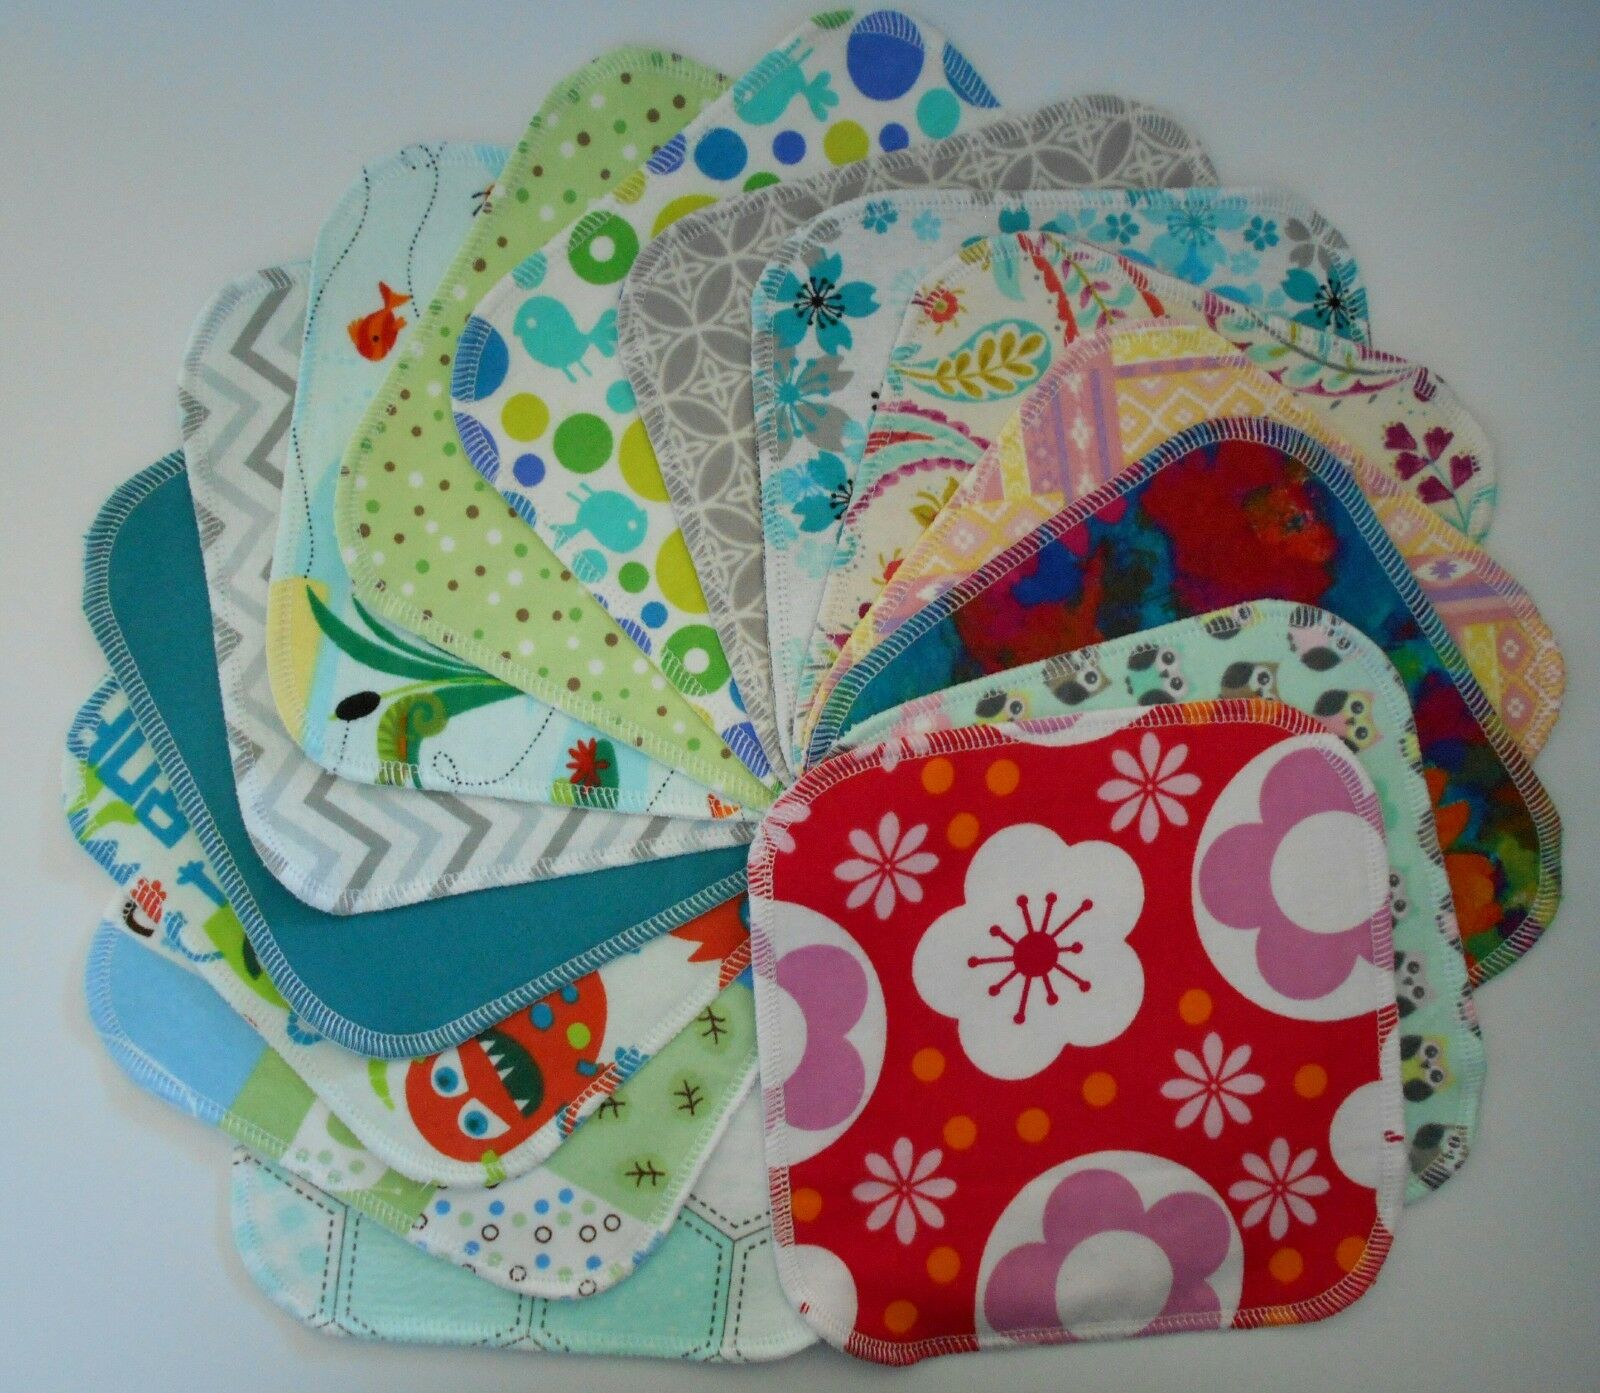 Assorted 5 Cloth Wipes Tissues Baby Flannel 2 Ply Family Cloth Reusable Random